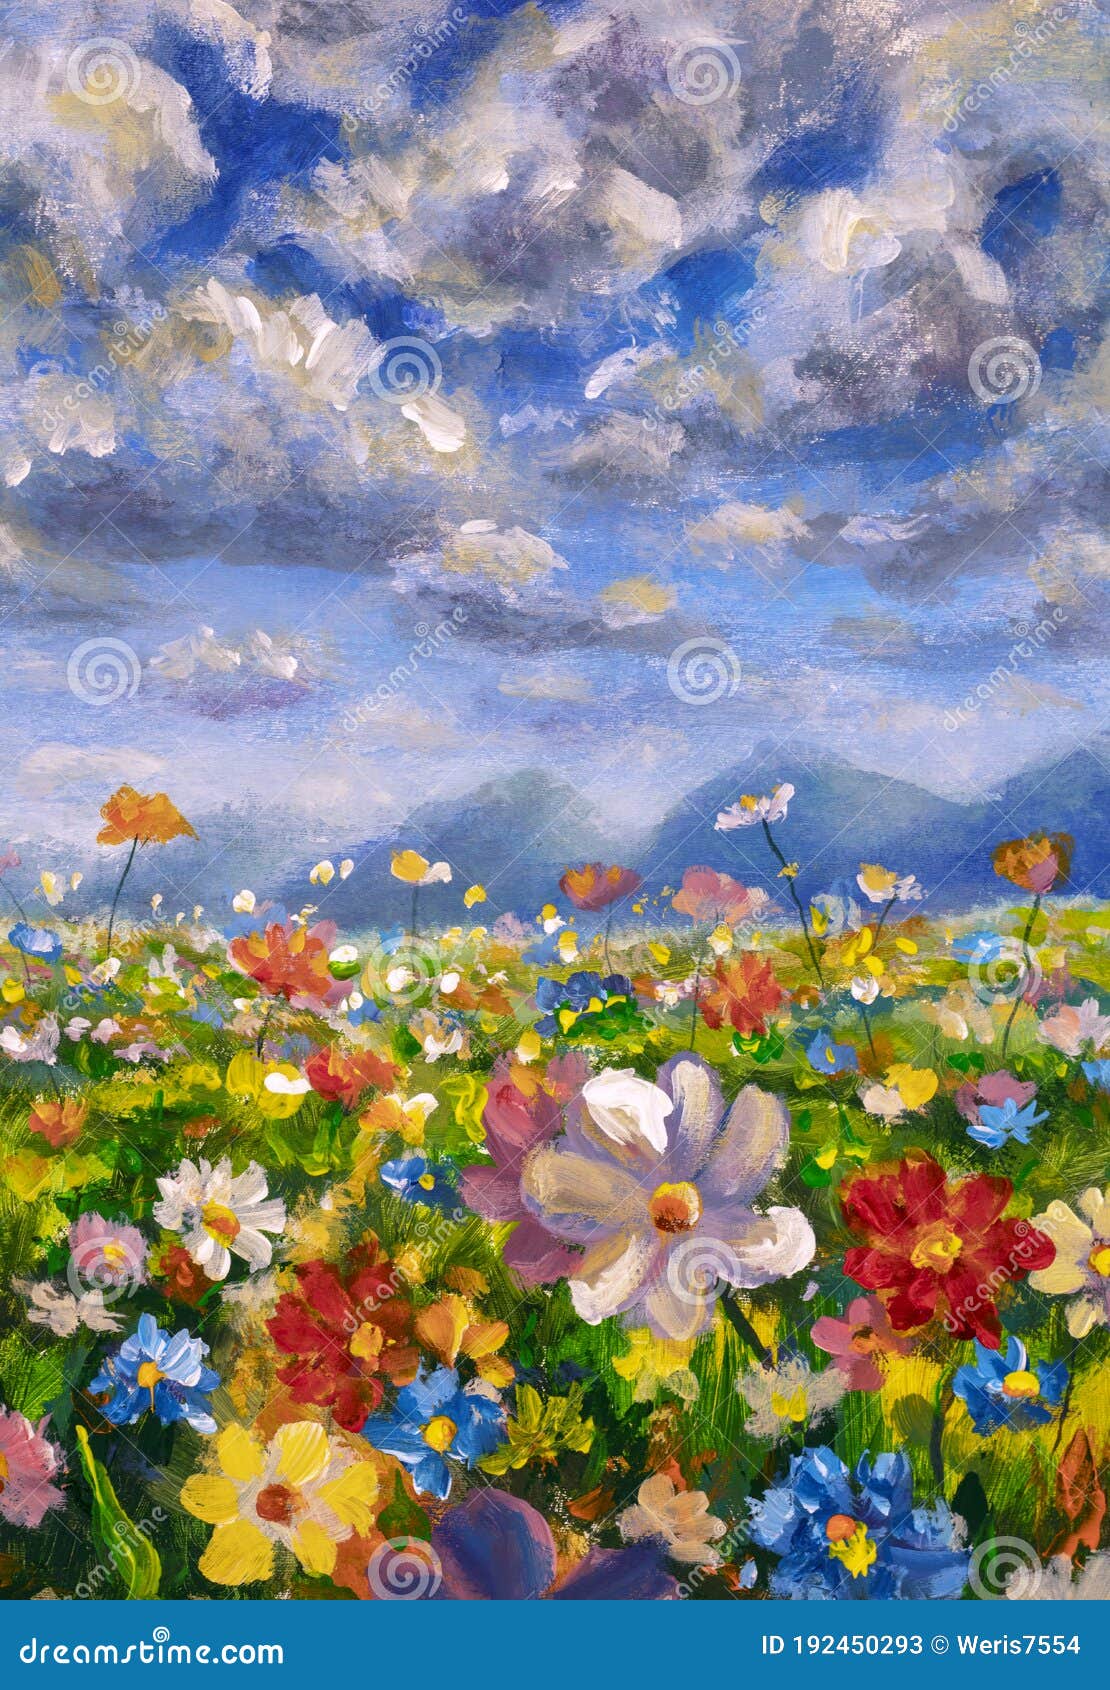 Landscape Flower Meadow Oil Painting Stock Image Image Of Paintings